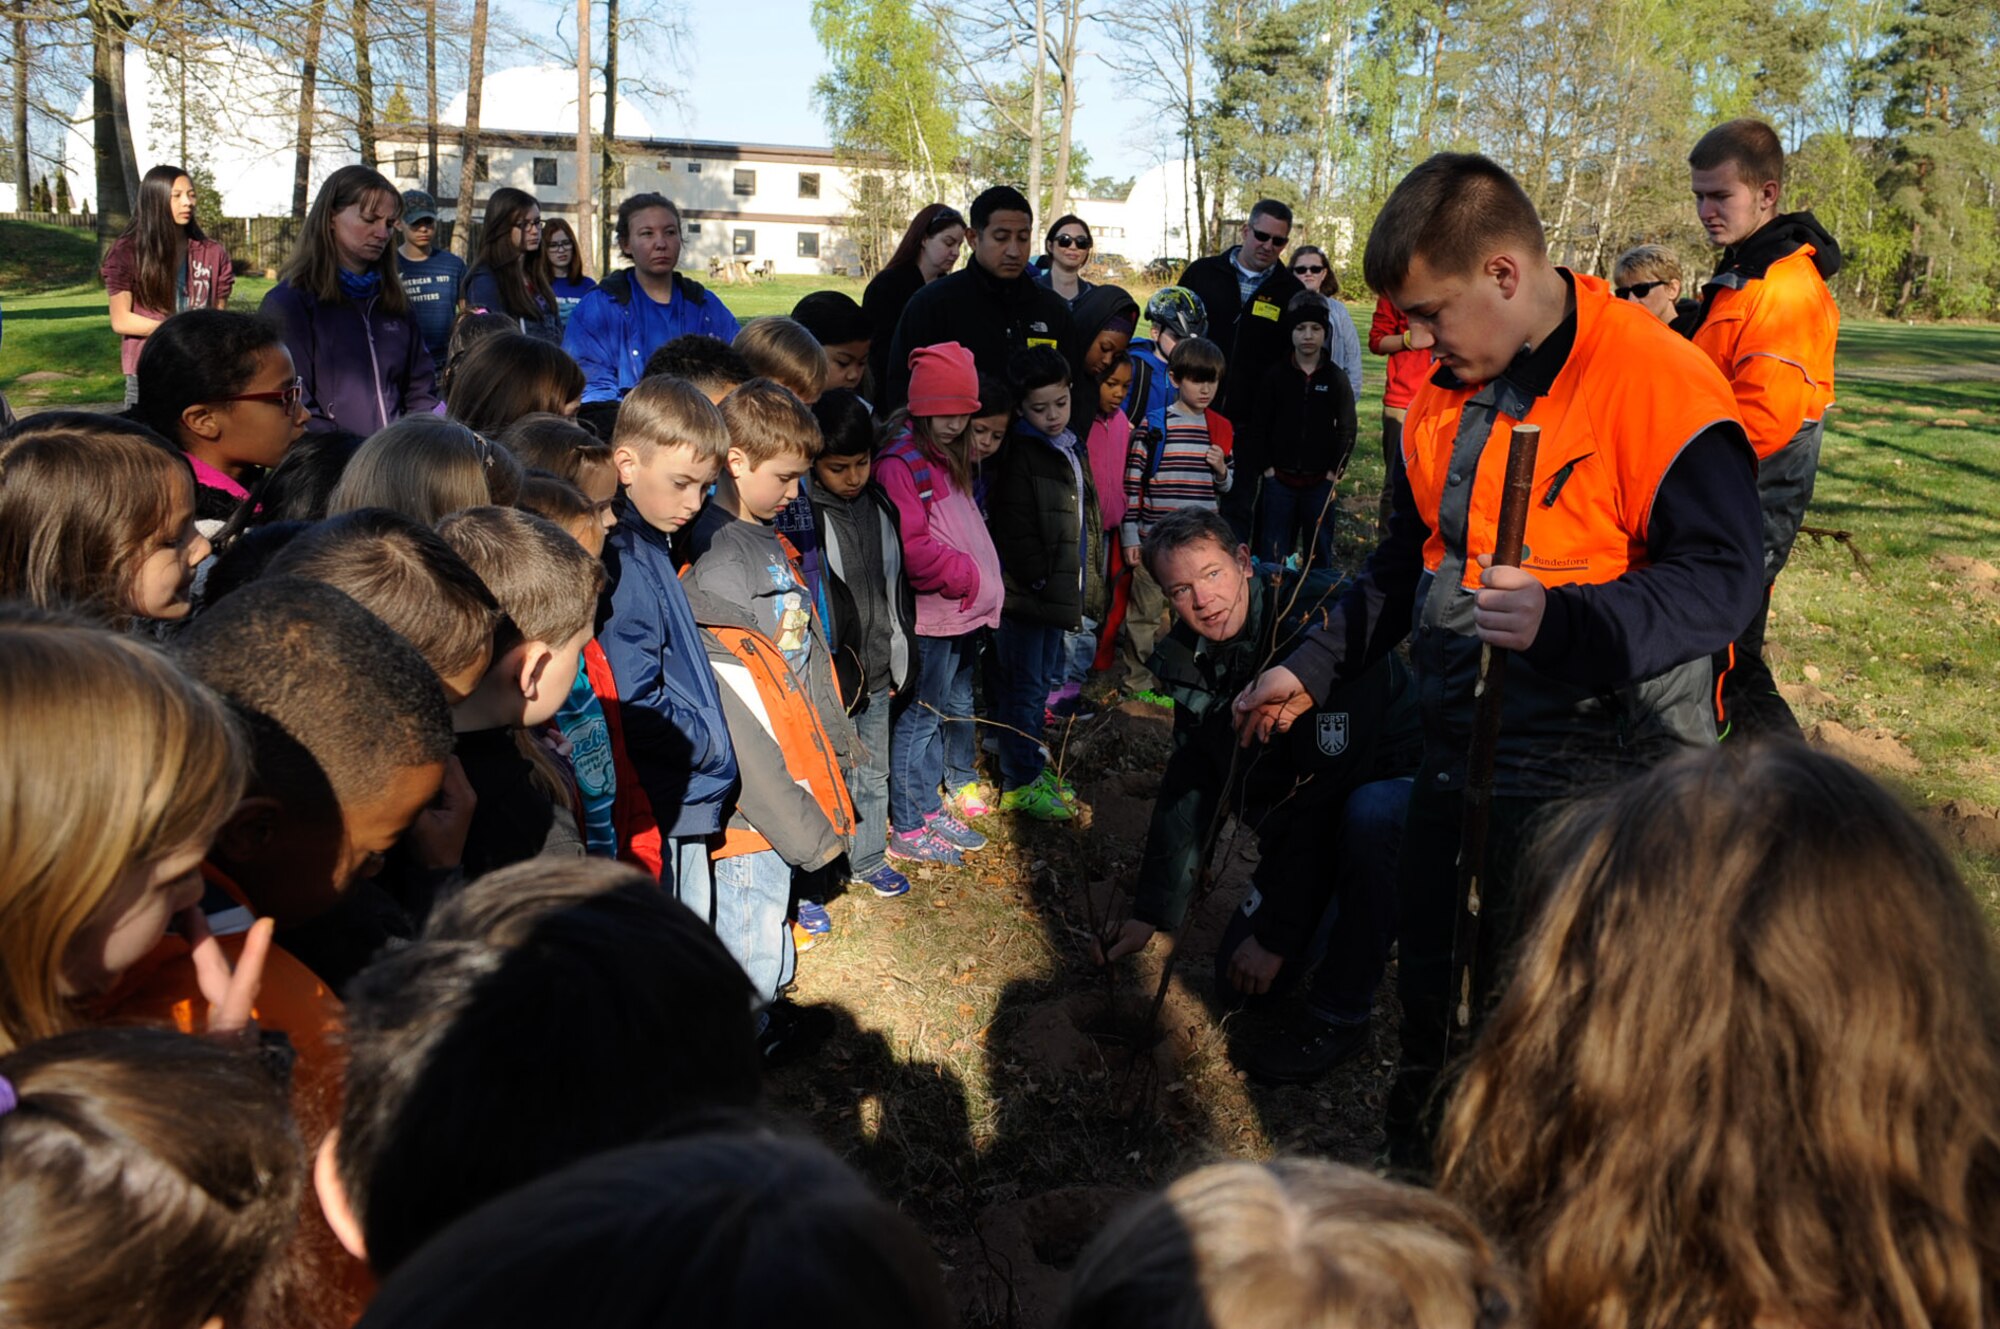 Federal forest departments show students from the Kaiserslautern Military Community the correct way to plant a tree during an Earth Day tree planting celebration on Ramstein Air Base, Germany, April 21, 2017. Students celebrated Earth Day, demonstrating support for environmental protection by planting trees. (U.S. Air Force photo by Airman 1st Class Savannah L. Waters)